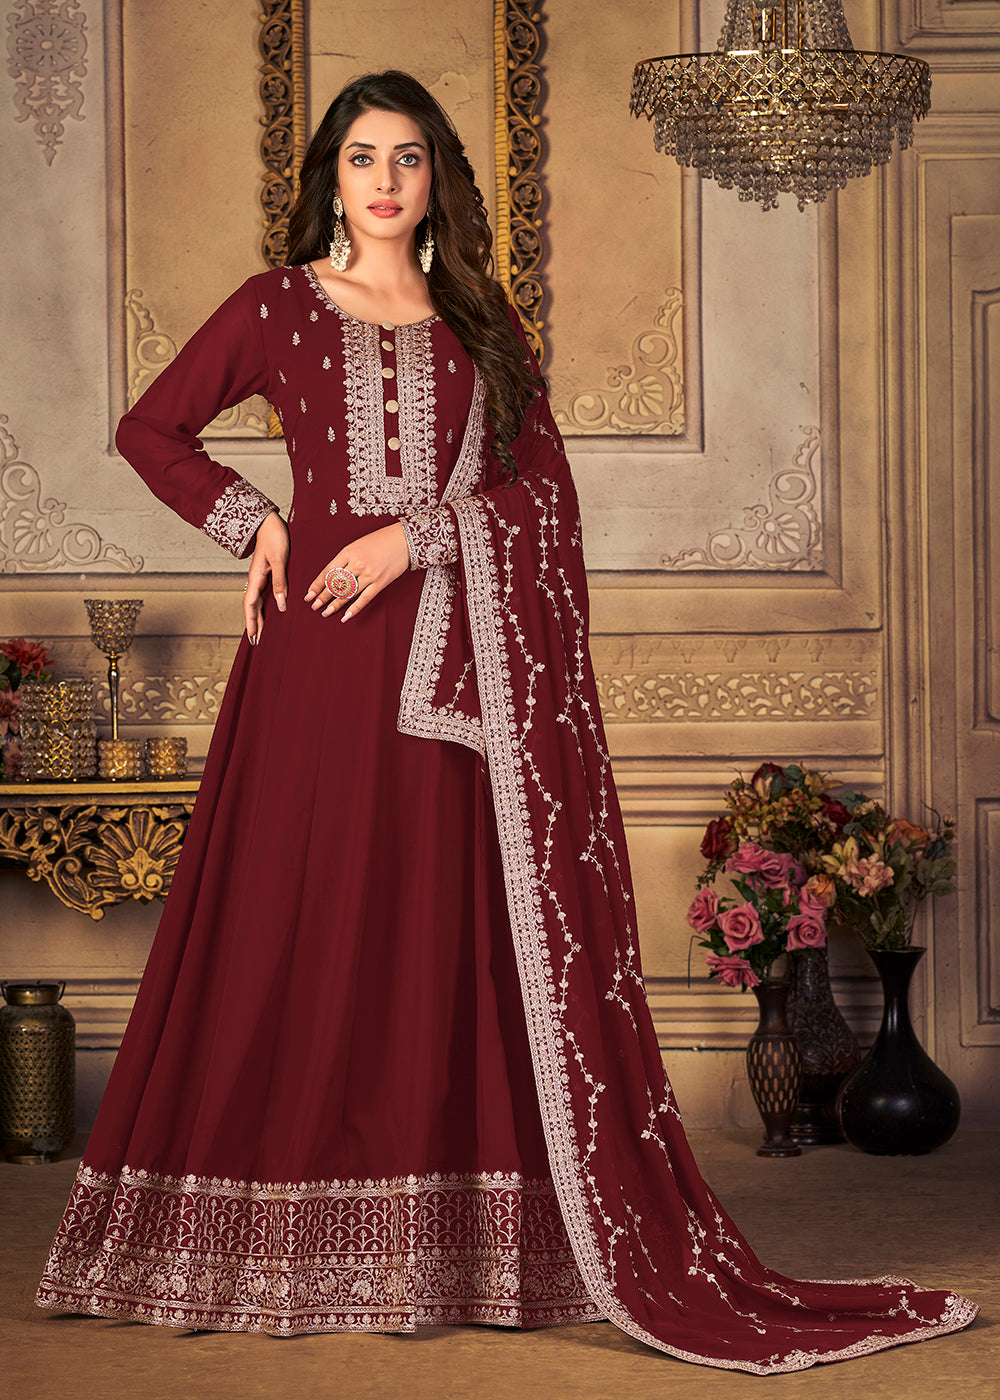 25+ Red Karwa Chauth Dress Ideas | Saree designs party wear, Fashionable  saree blouse designs, Indian bride outfits